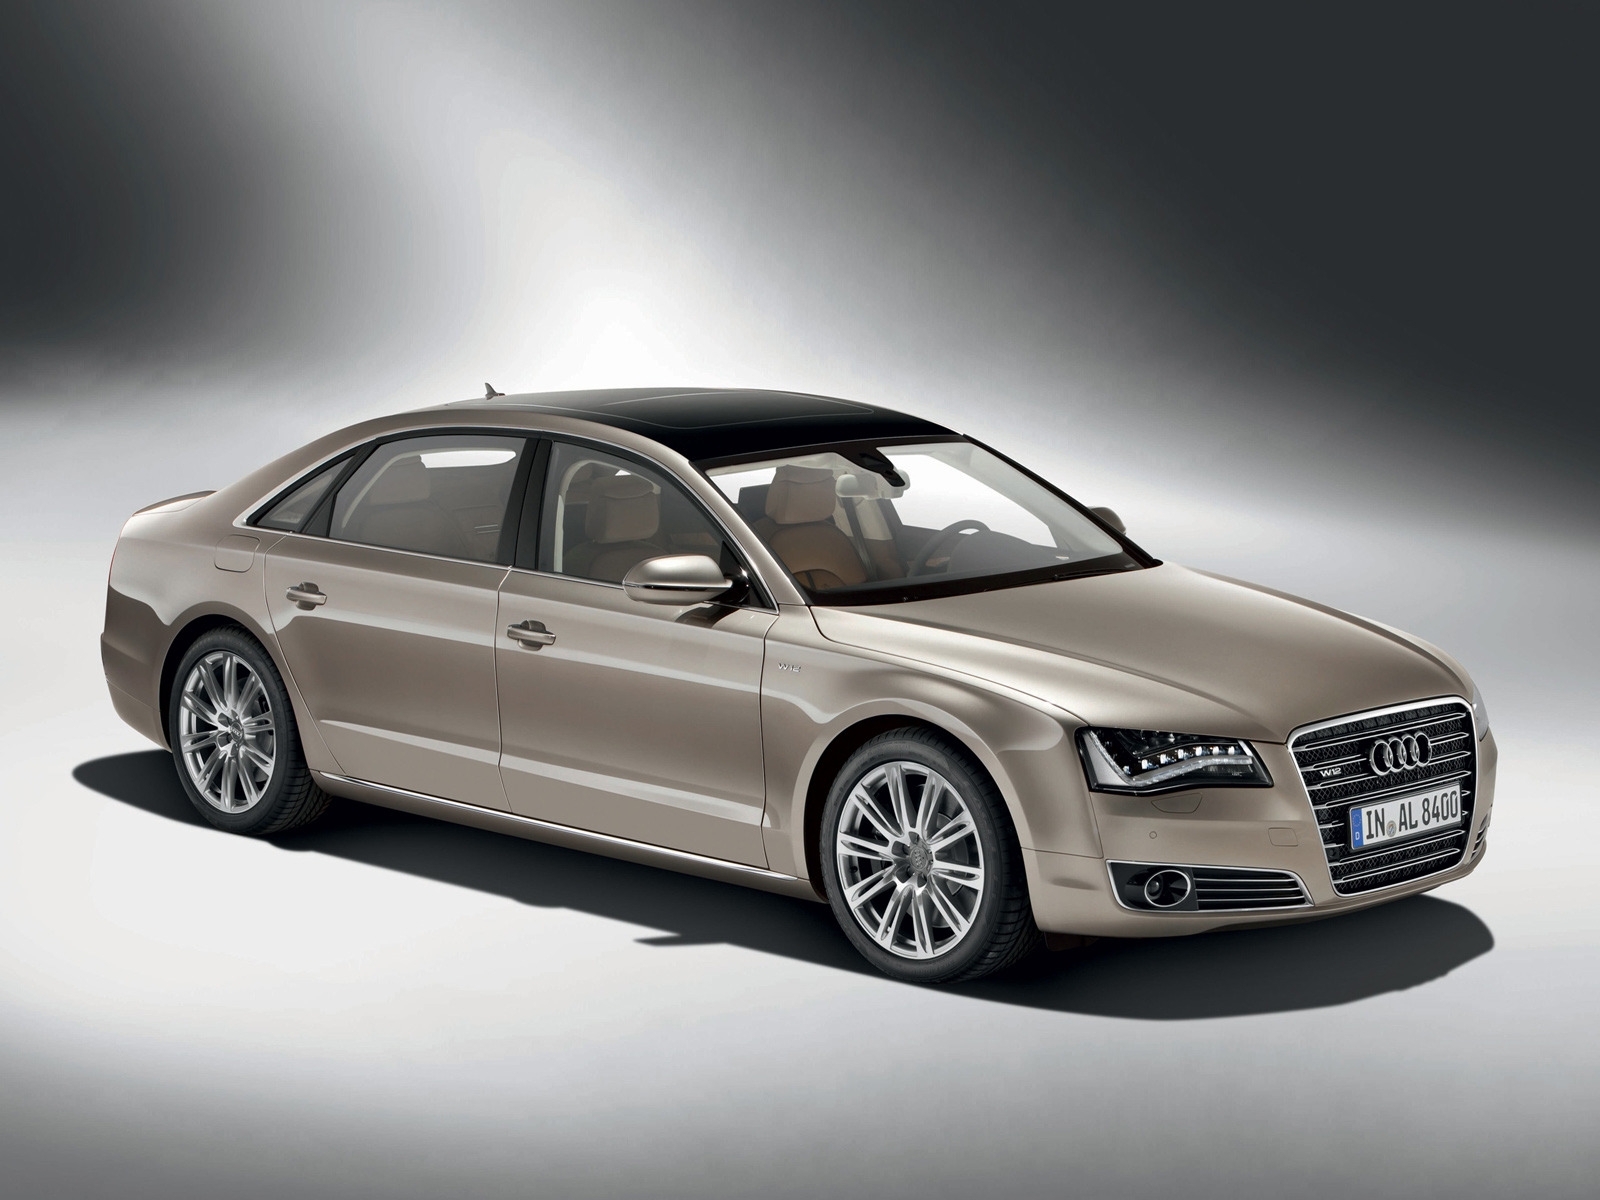 Audi A8 W12 2011 for 1600 x 1200 resolution